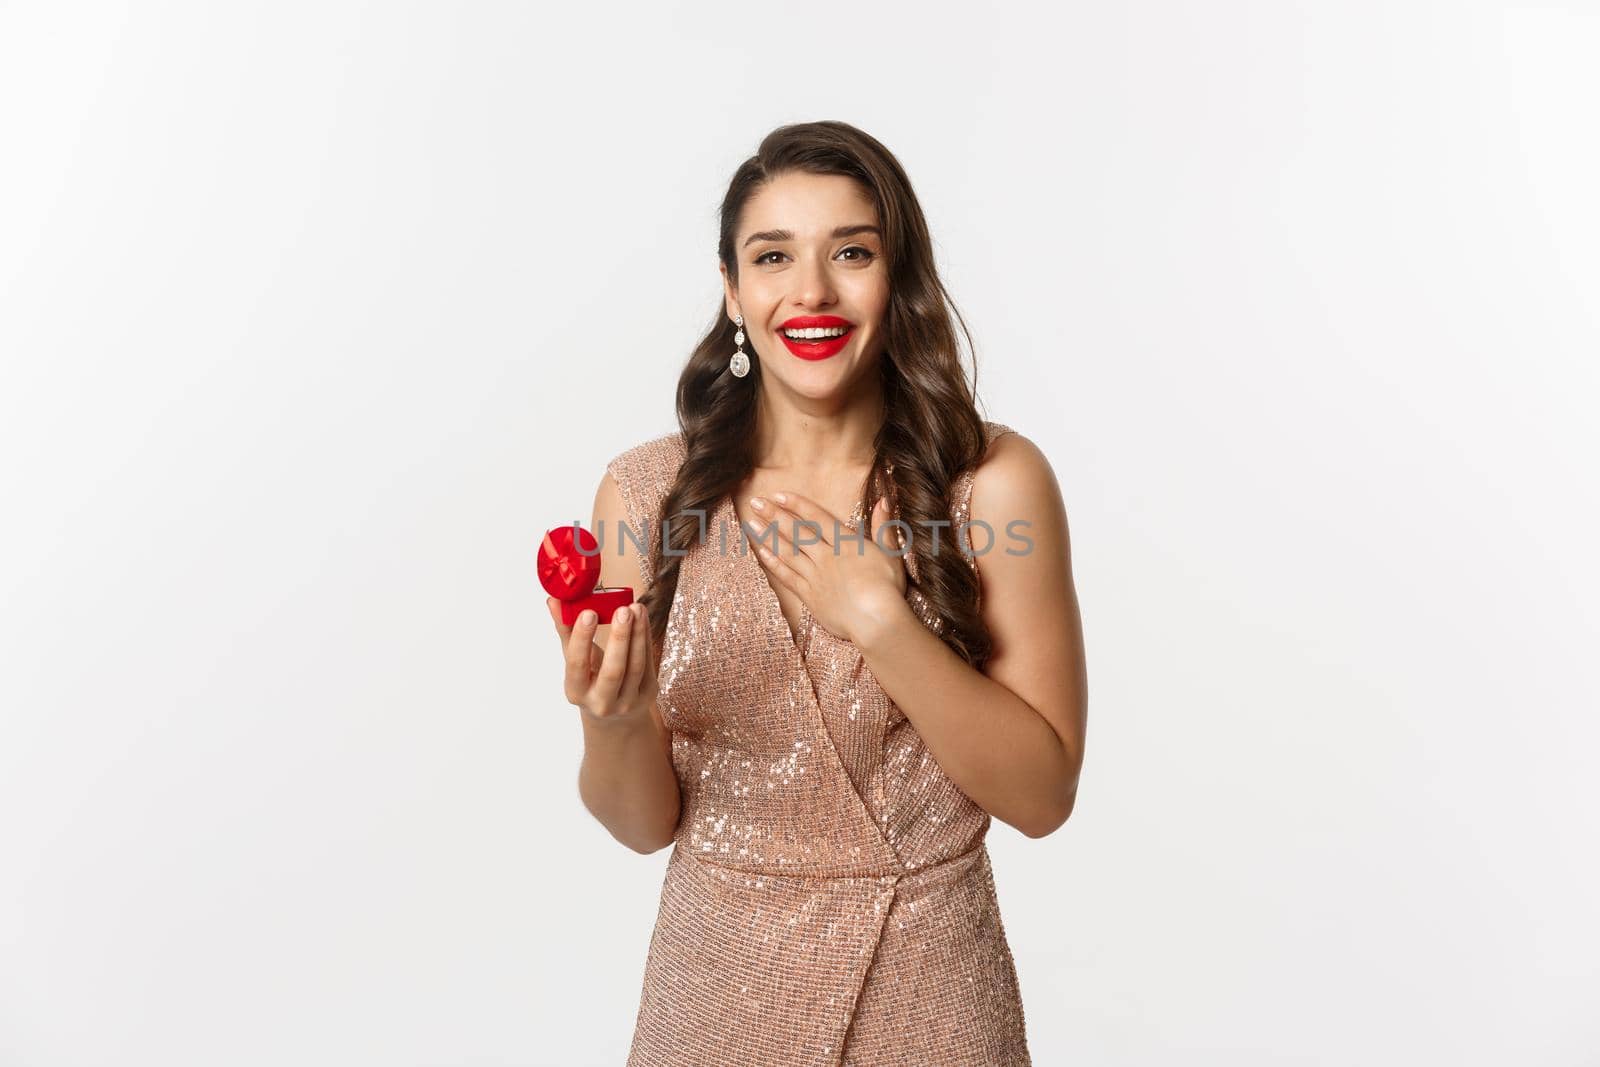 Image of beautiful woman in glamour dress receiving engagement ring, looking surprised and happy at camera, being proposed, standing over white background.